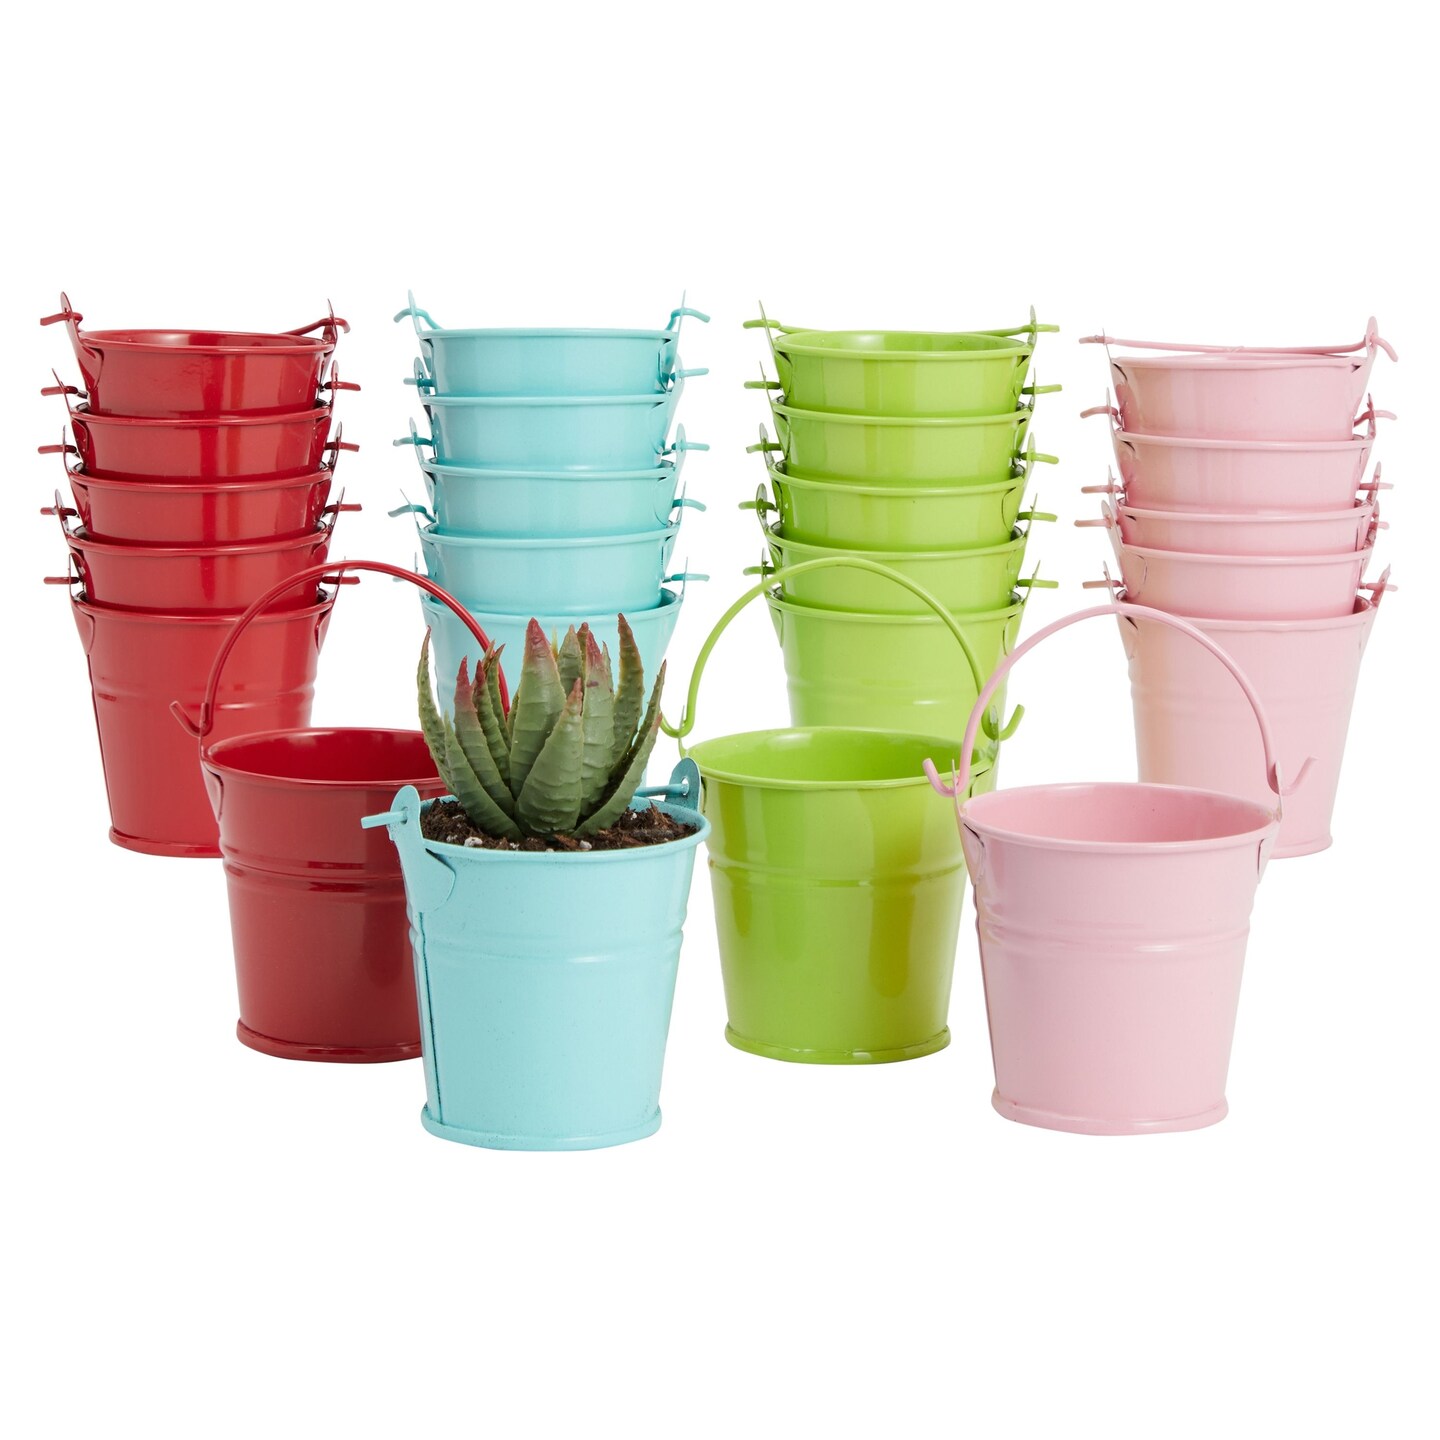 24-Pack Mini Metal Buckets - 2-inch Small Colorful Tin Pails for Party Favors (Green, Blue, Pink, Red)